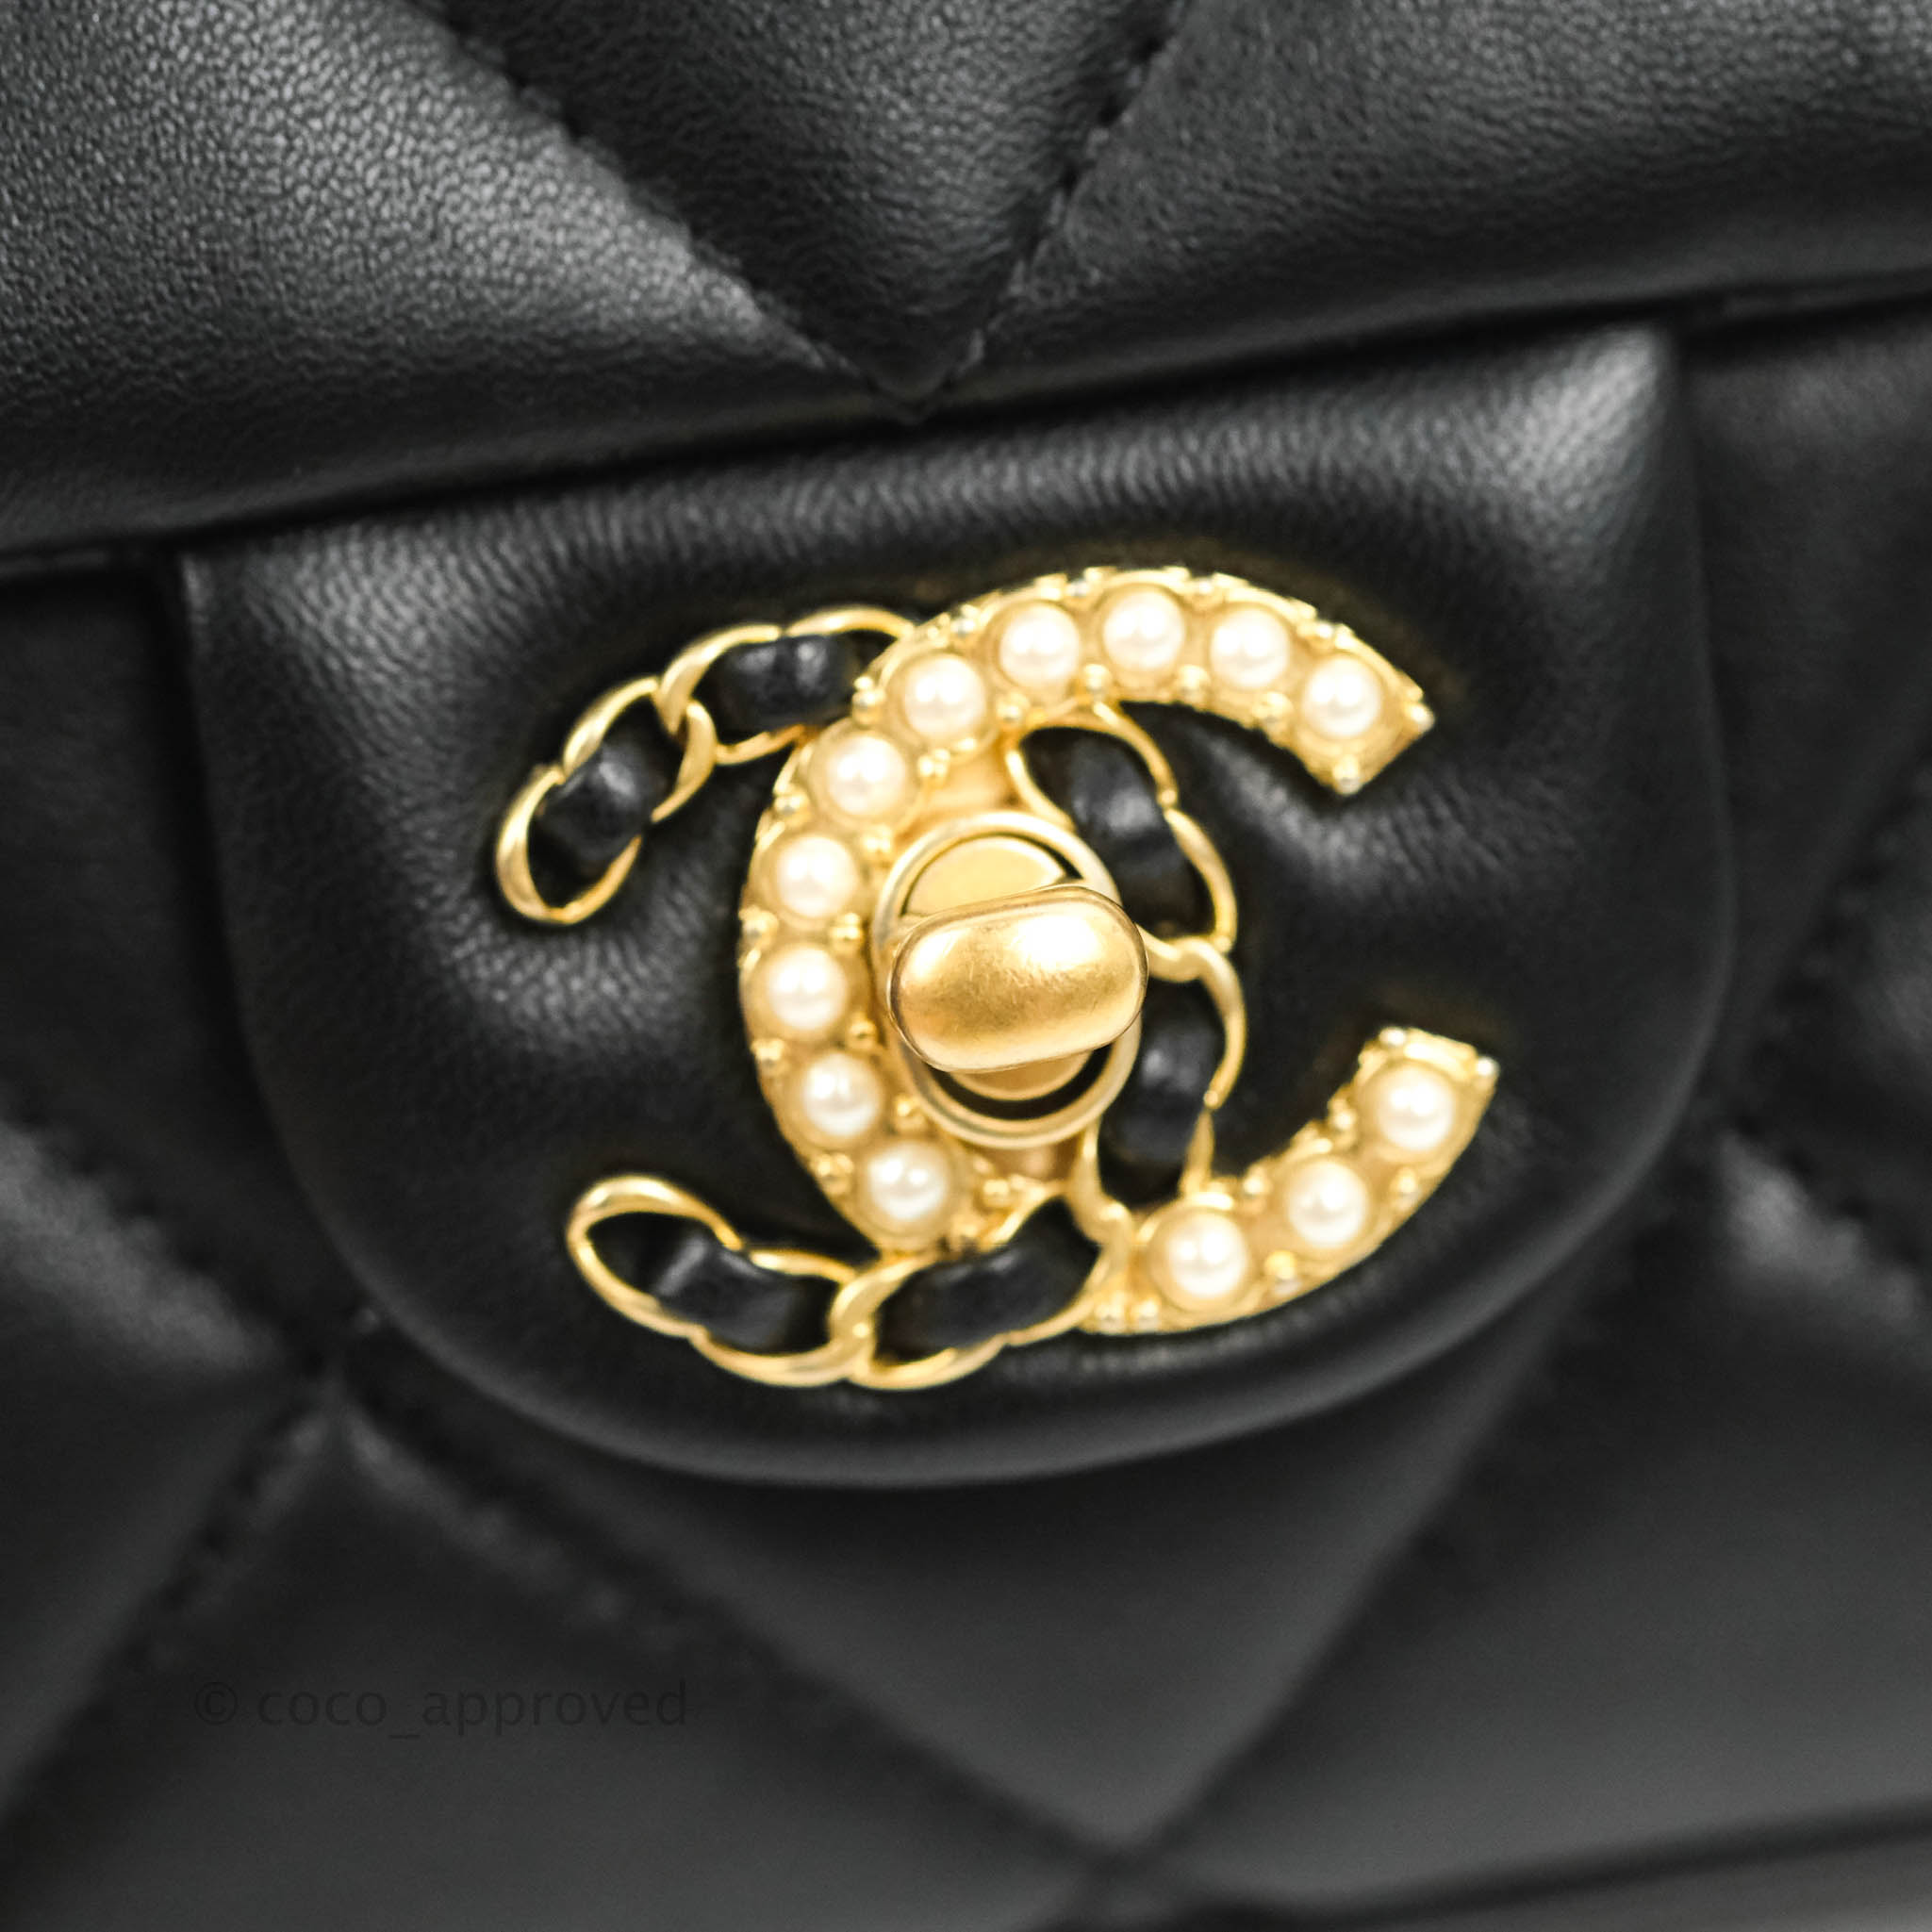 black chanel purse with chain